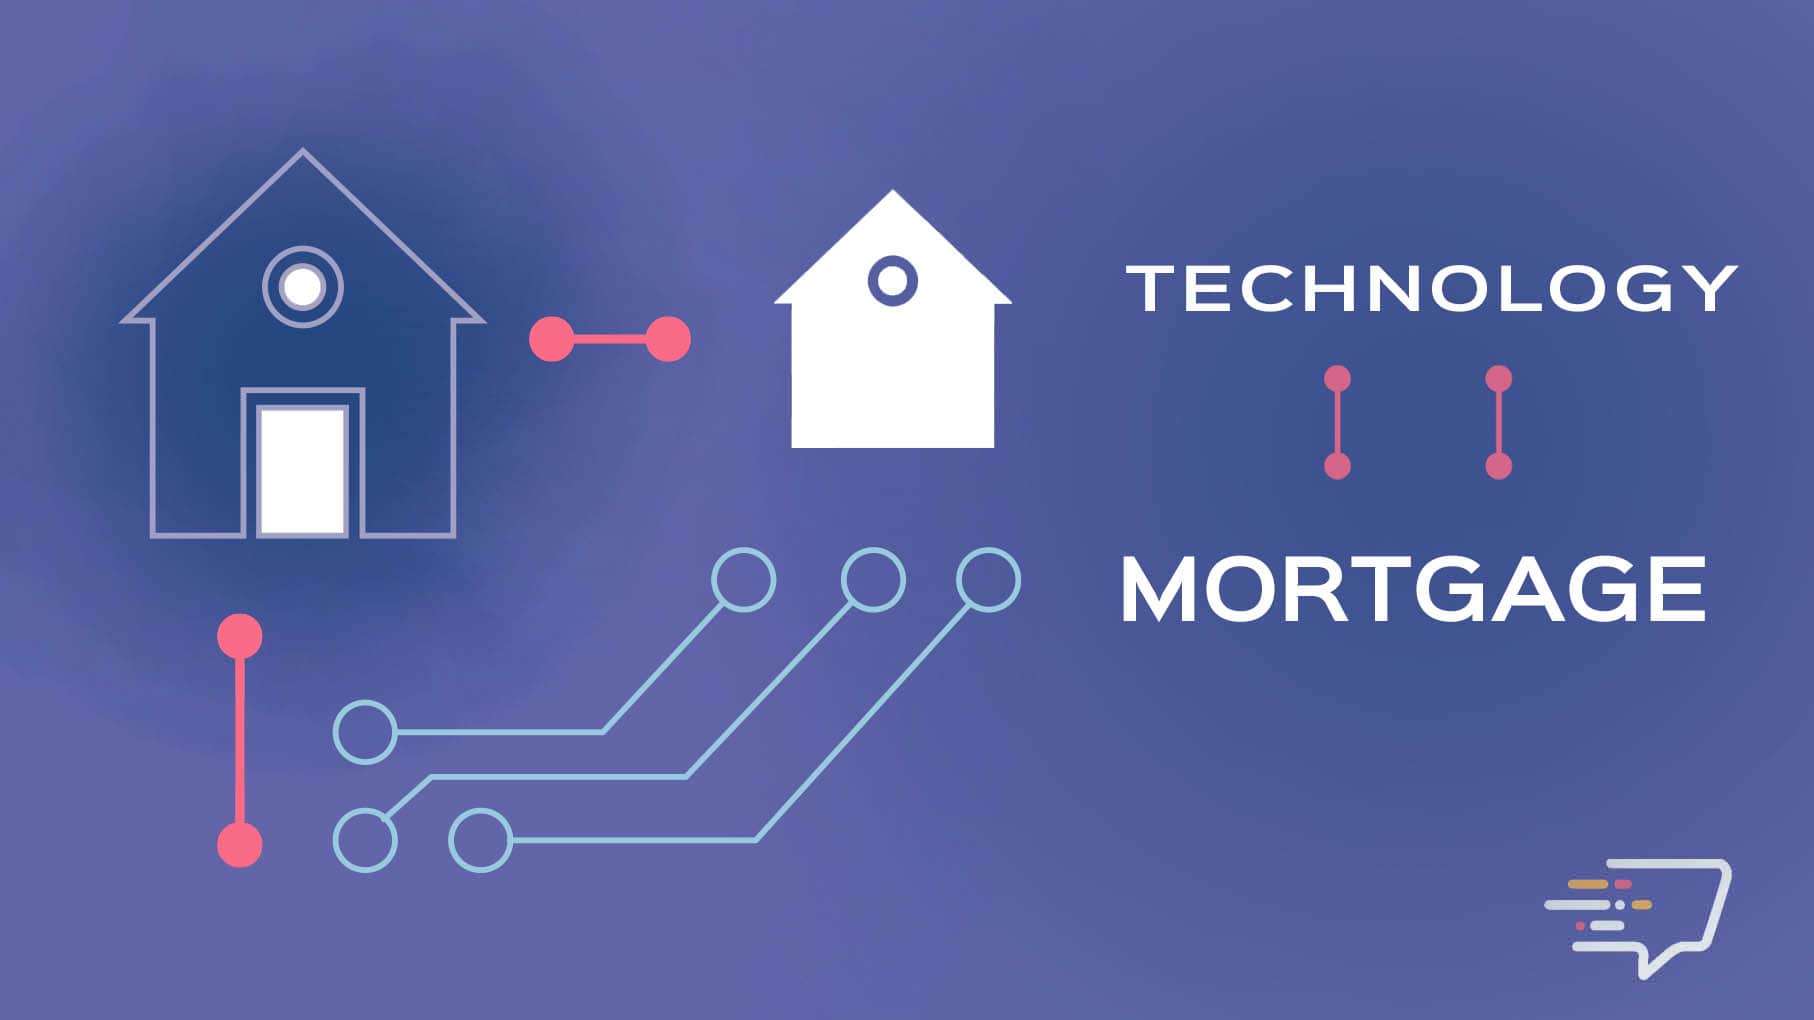 What impact will technology have on mortgage brokers?